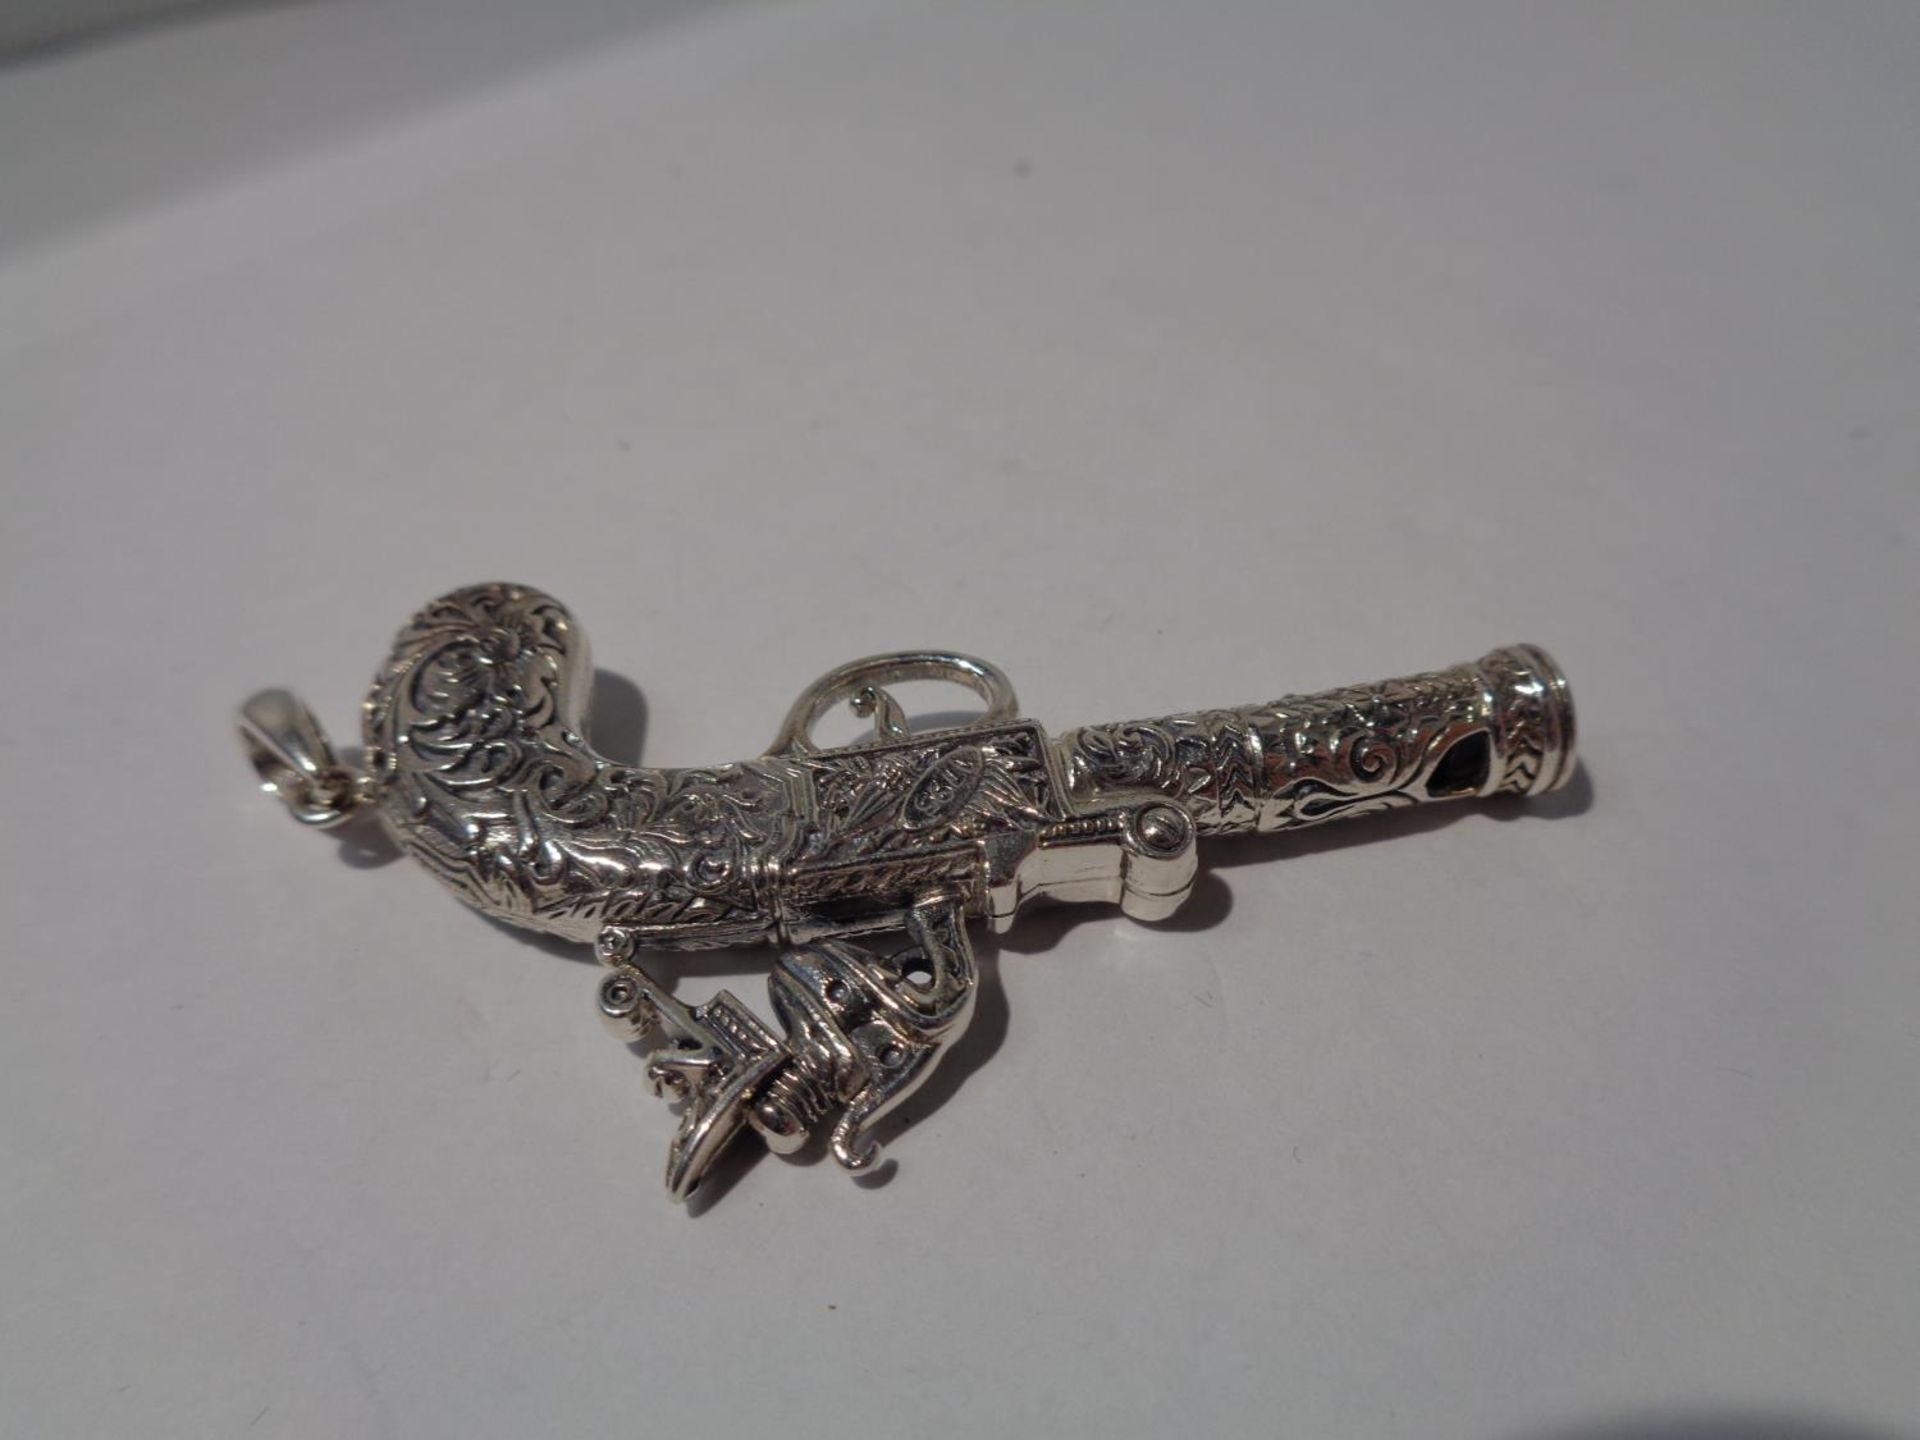 A PENDANT IN THE FORM OF AN ORNATE PISTOL - Image 2 of 2